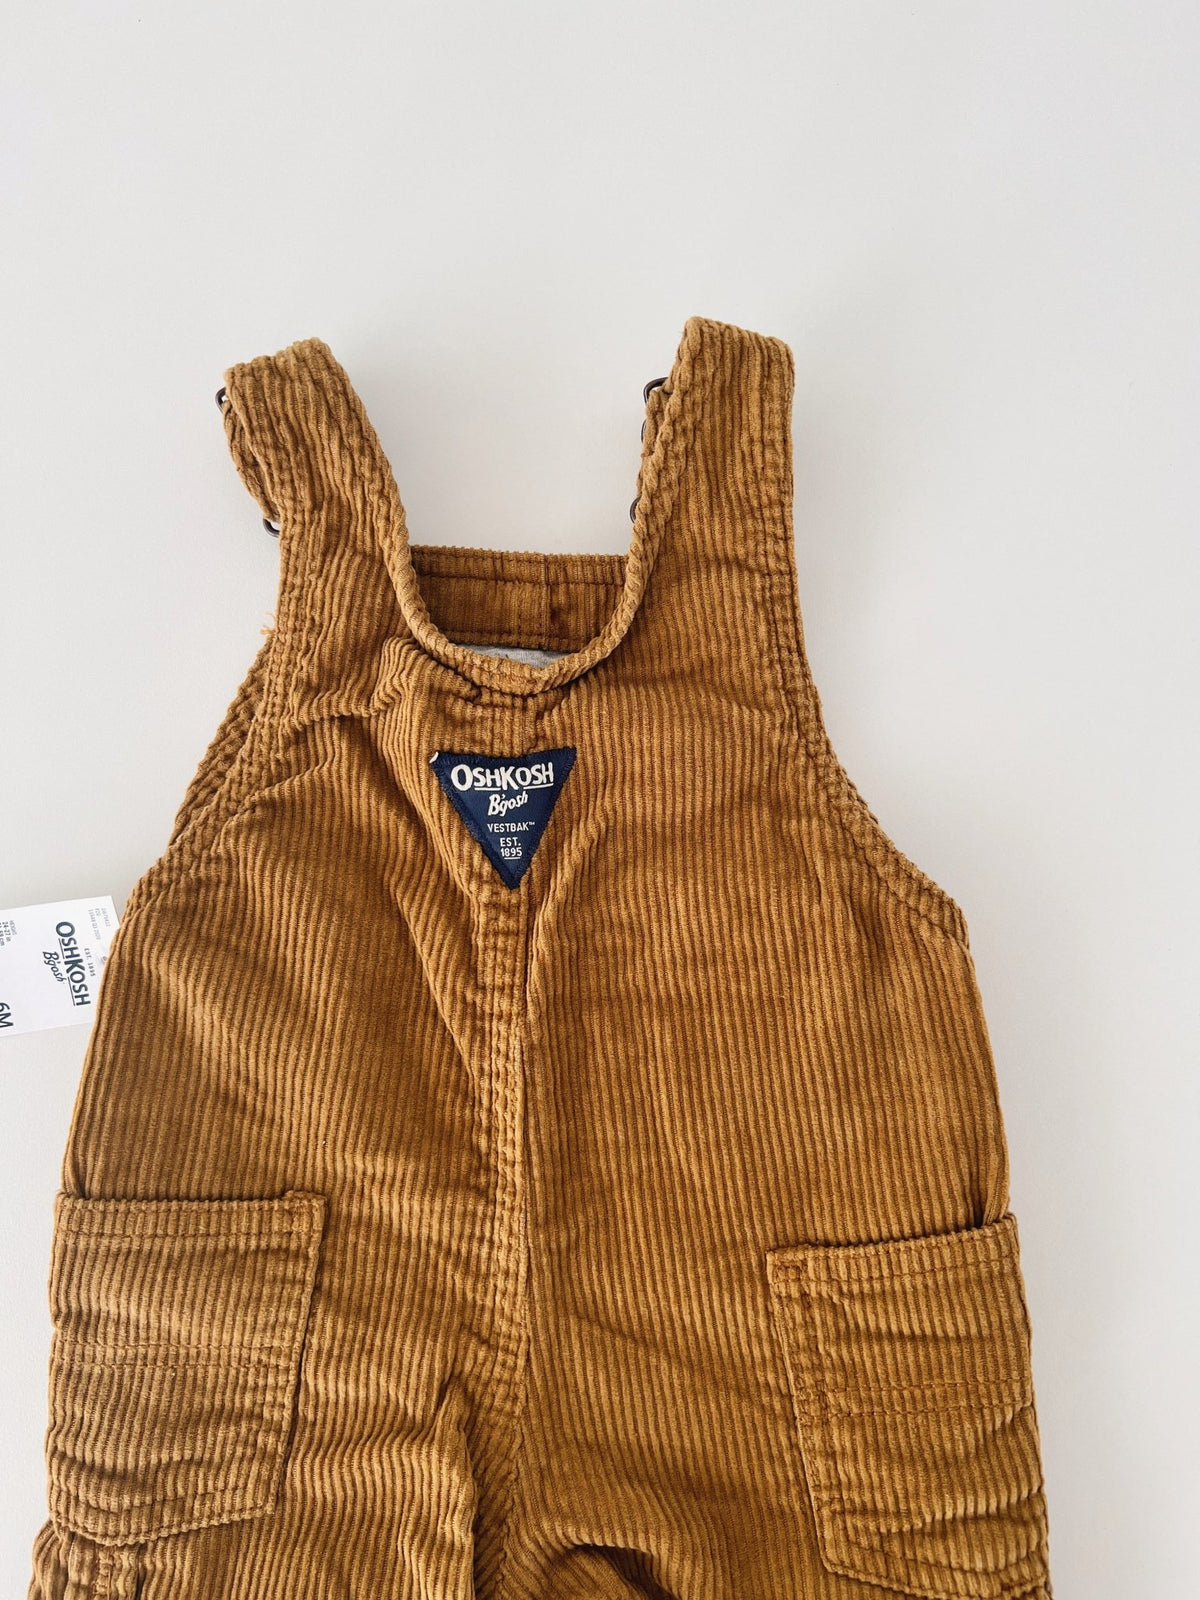 Oshkosh overall pre loved 6m+ - Marlow and Mae